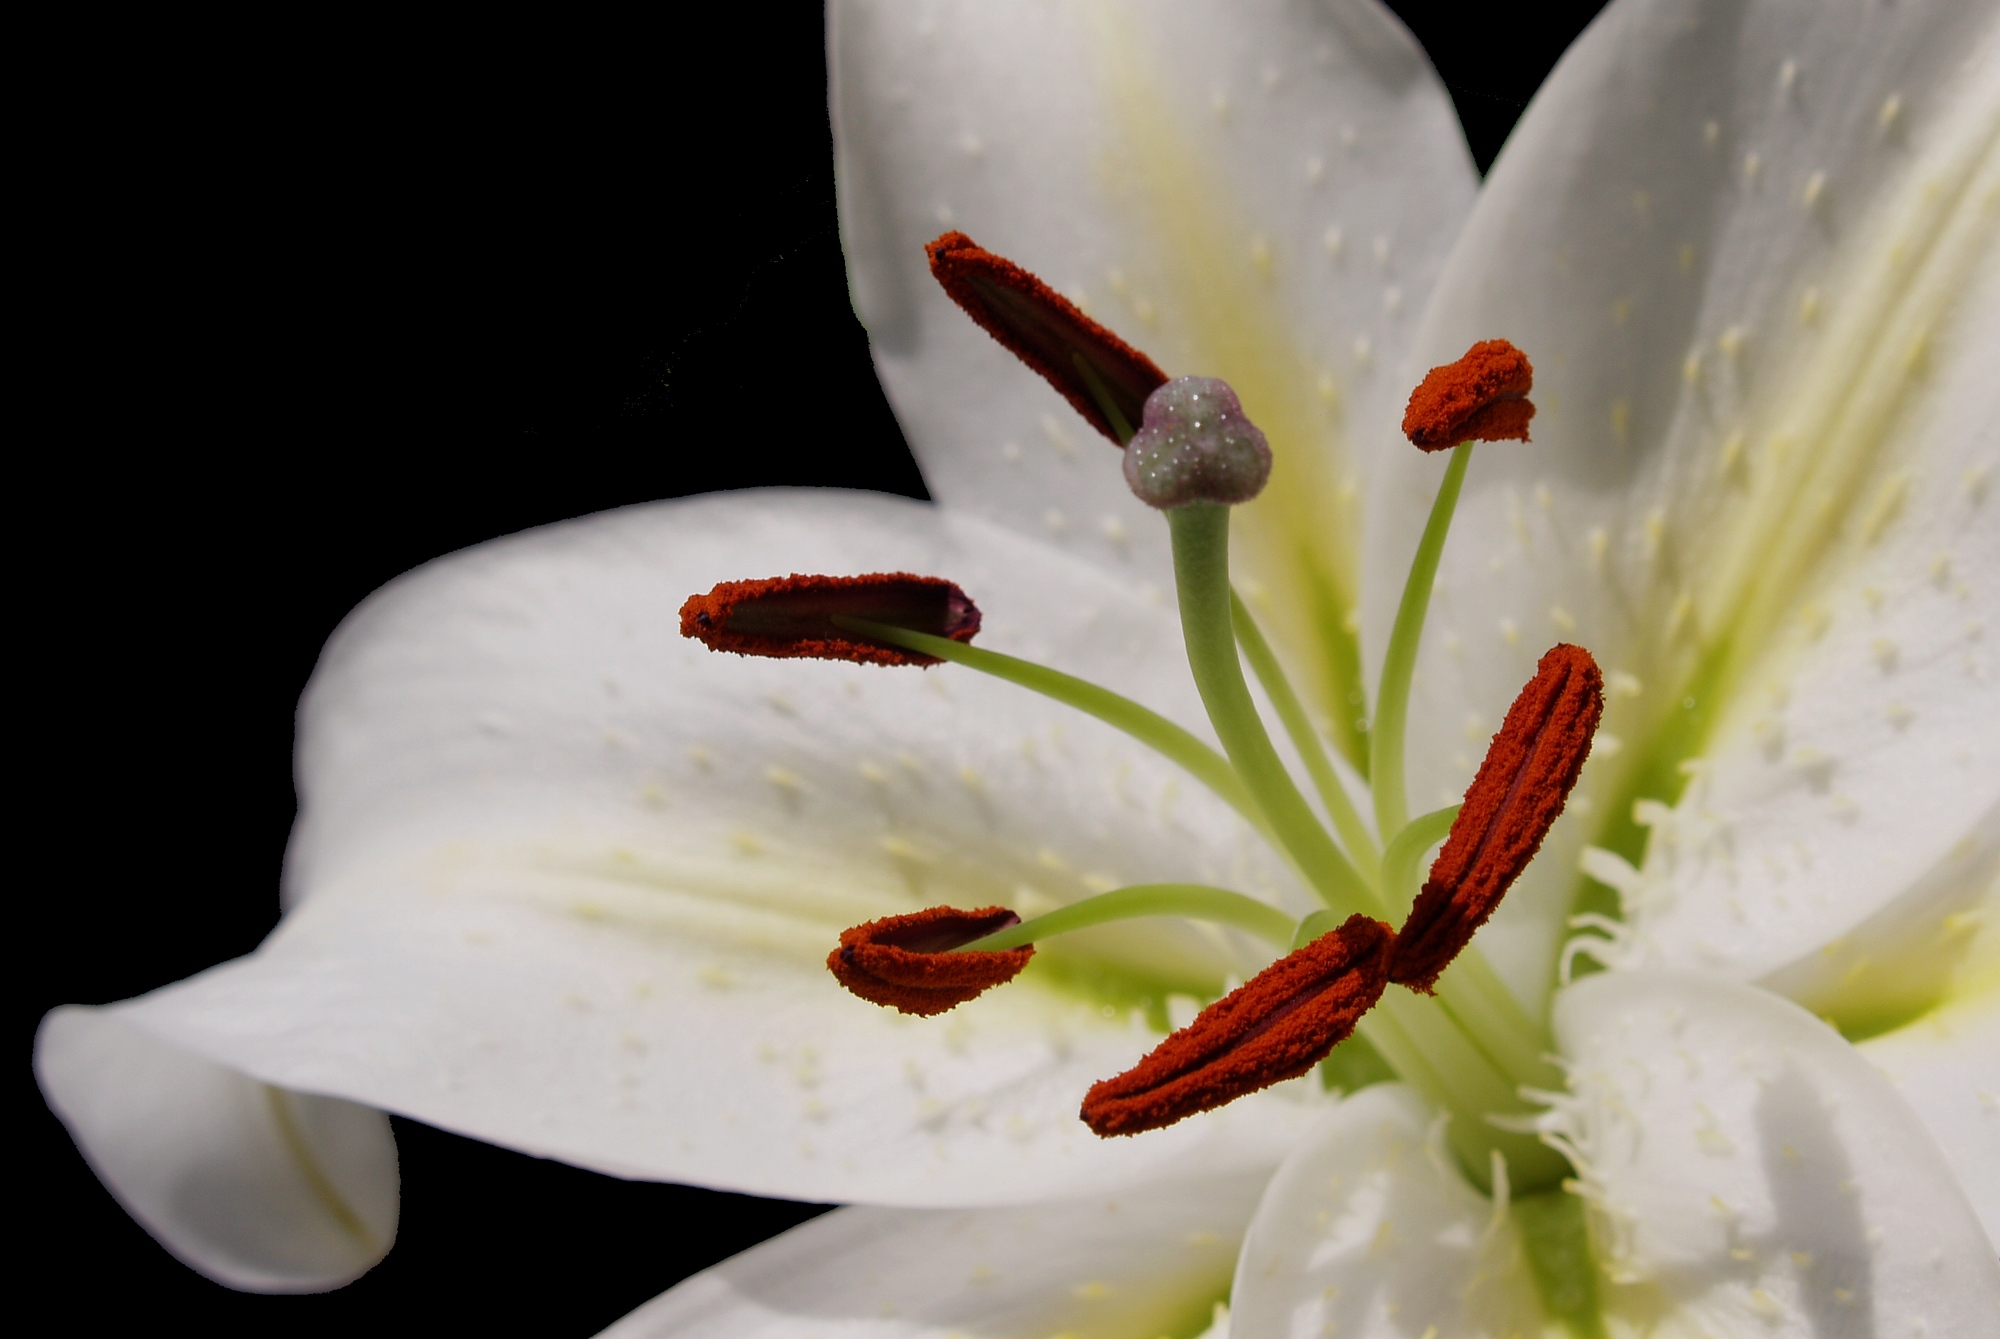 About the beautiful Casa Blanca Lily - Flower Press